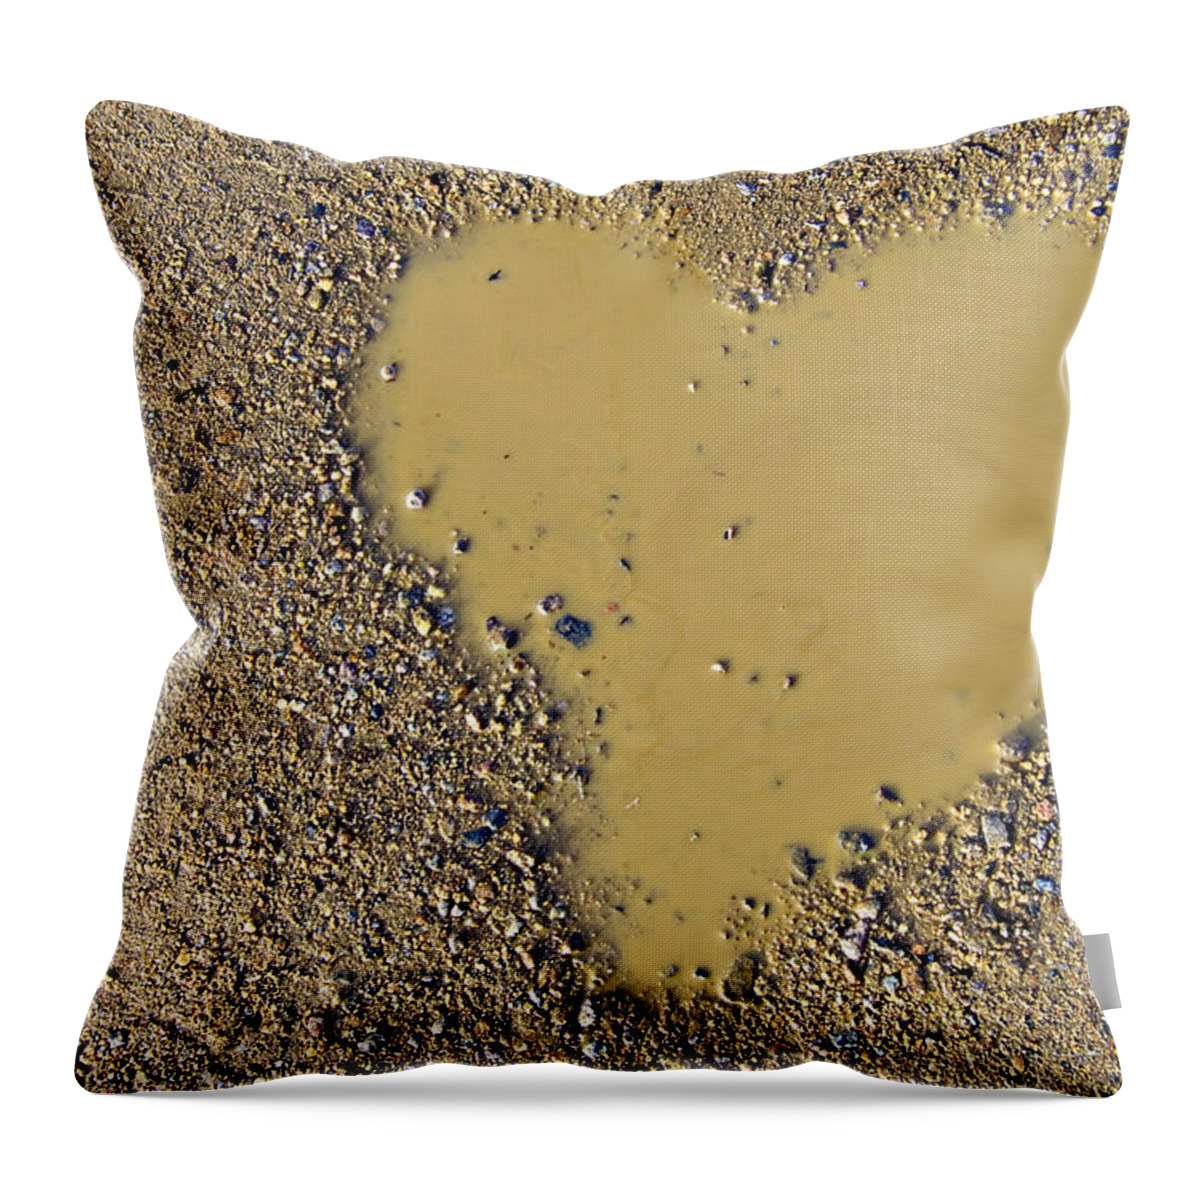 Love Throw Pillow featuring the photograph Love In A Muddy Puddle by Meirion Matthias